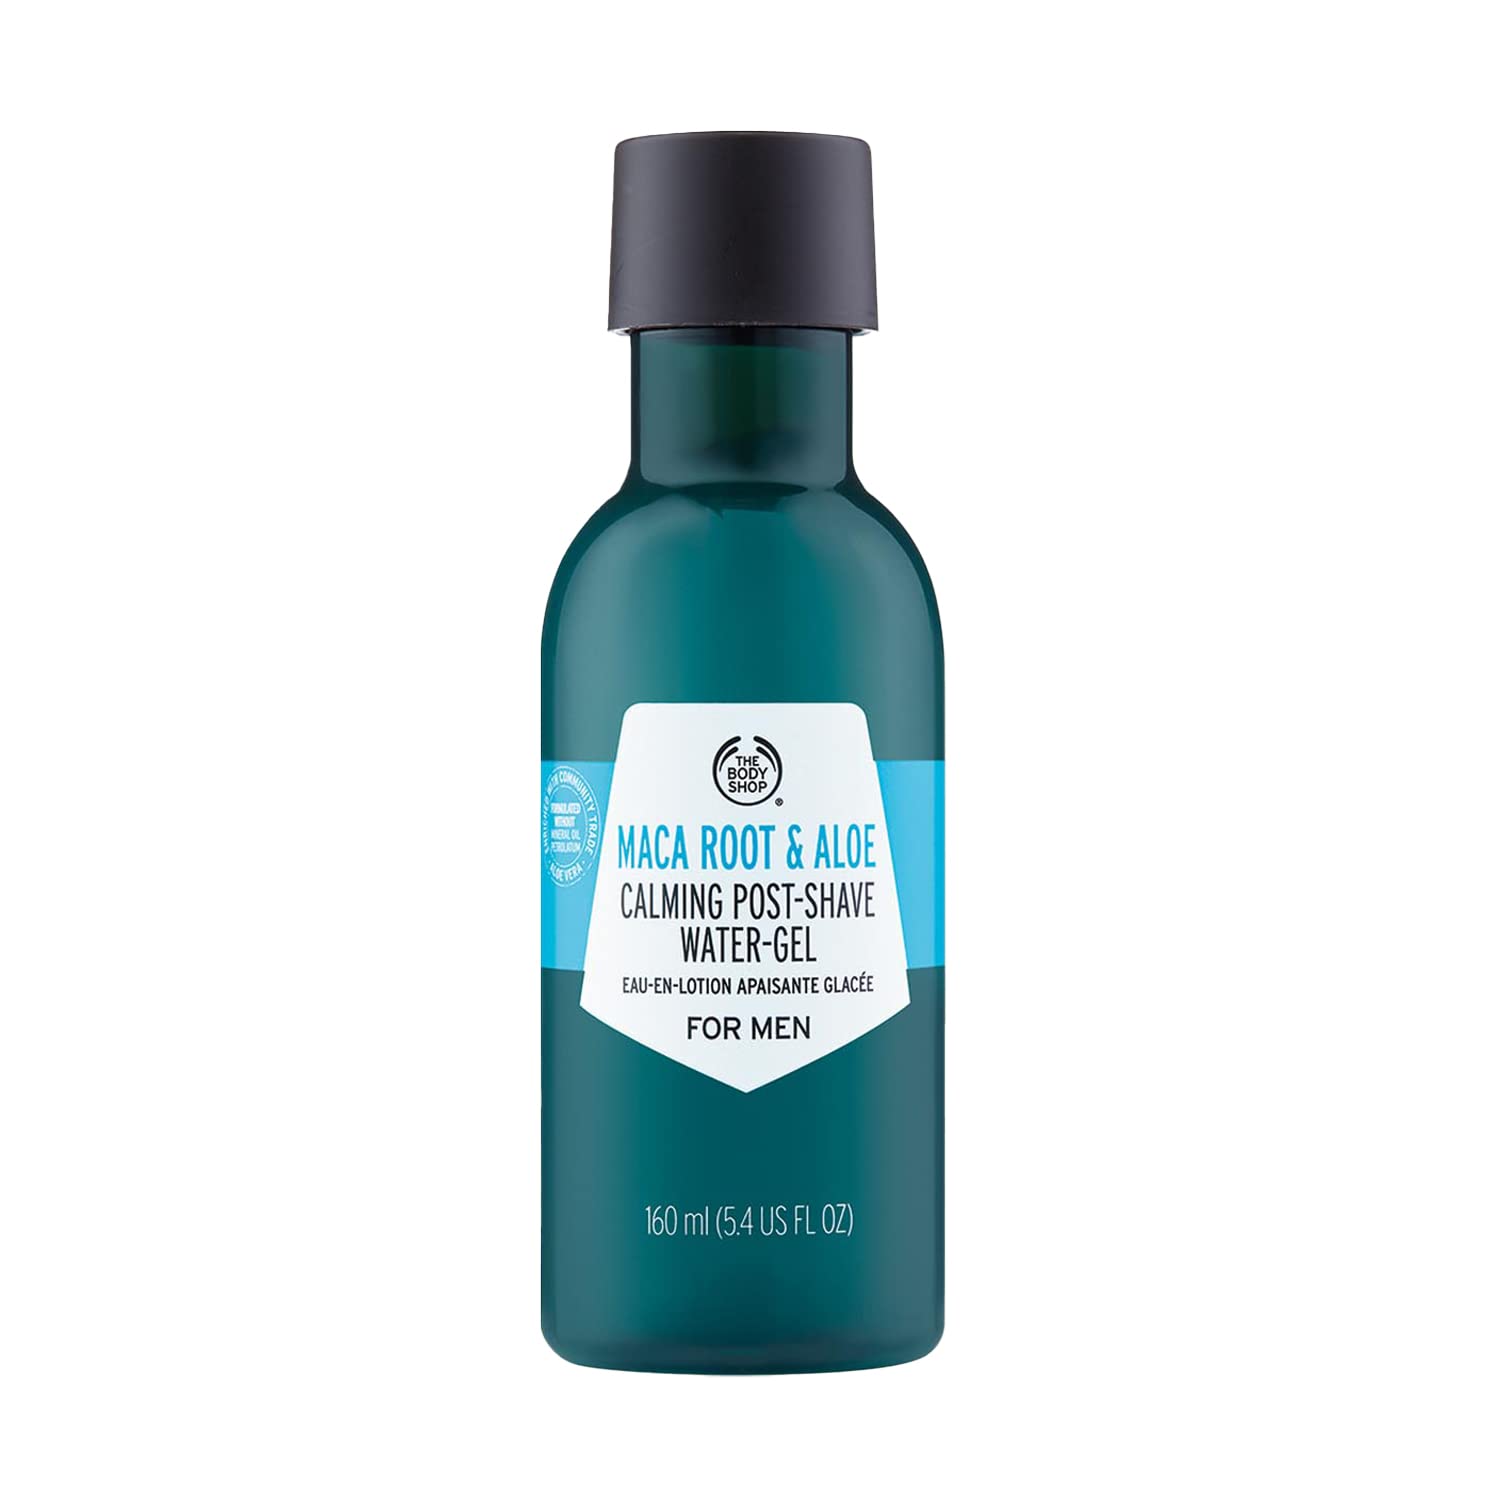 The Body Shop Maca Root & Aloe Post-Shave Water-Gel for Men